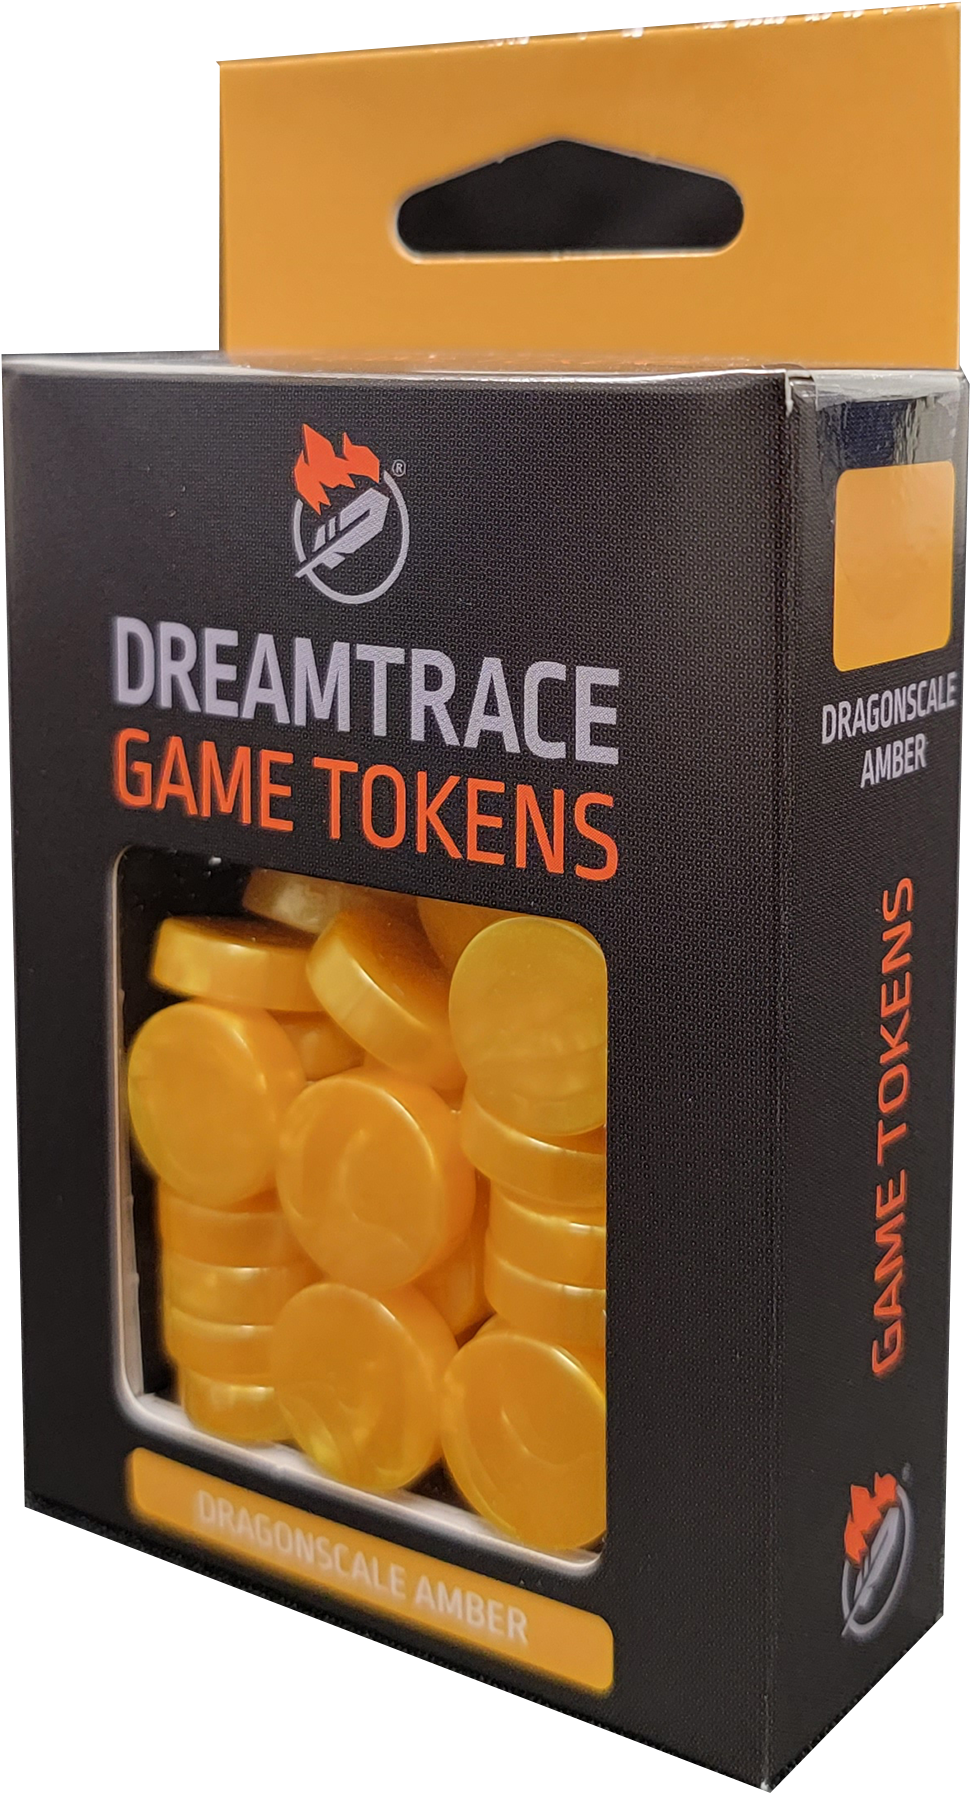 Dreamtrace Gaming Tokens: Dragonscale Amber 